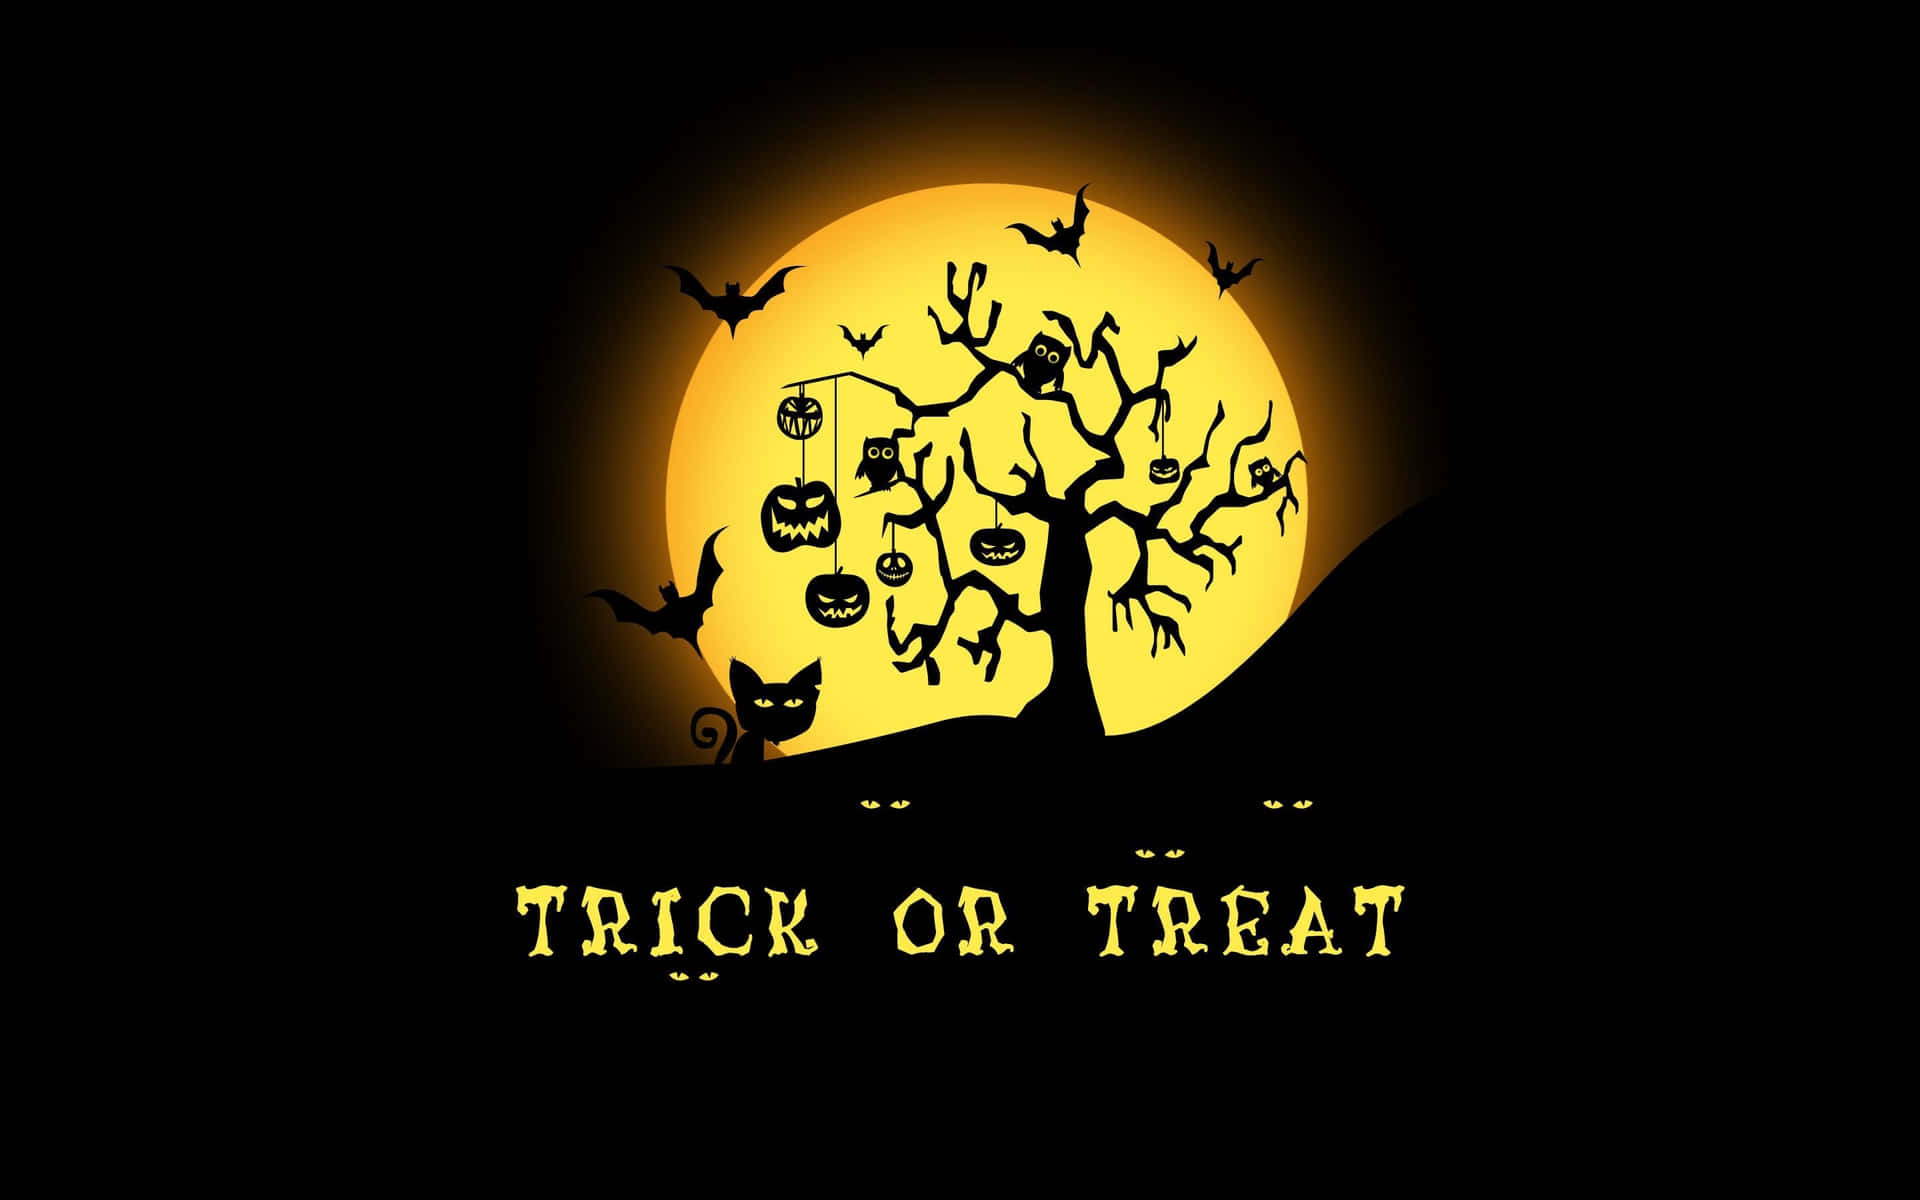 Prepare For A Spooky Night Of ‘trick R Treat’! Background